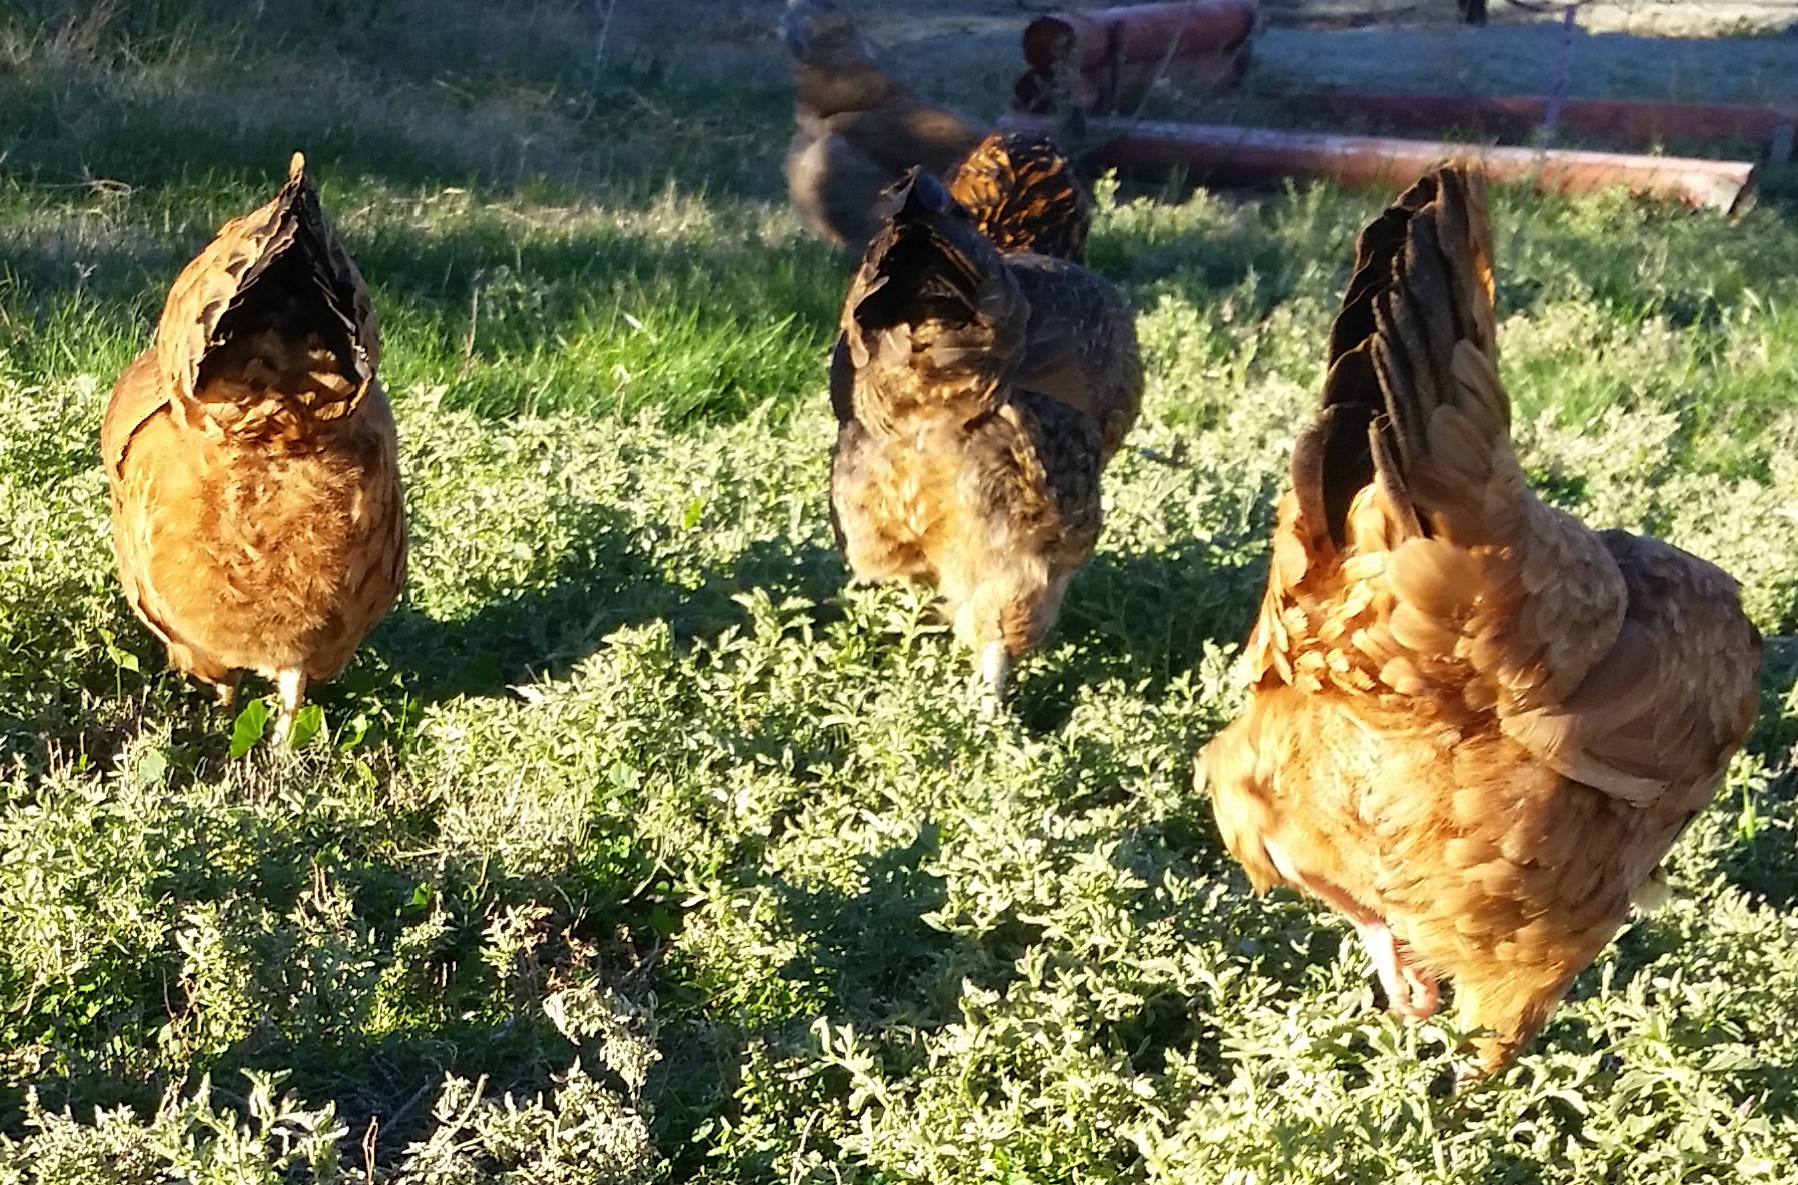 Chickens can help turn compost